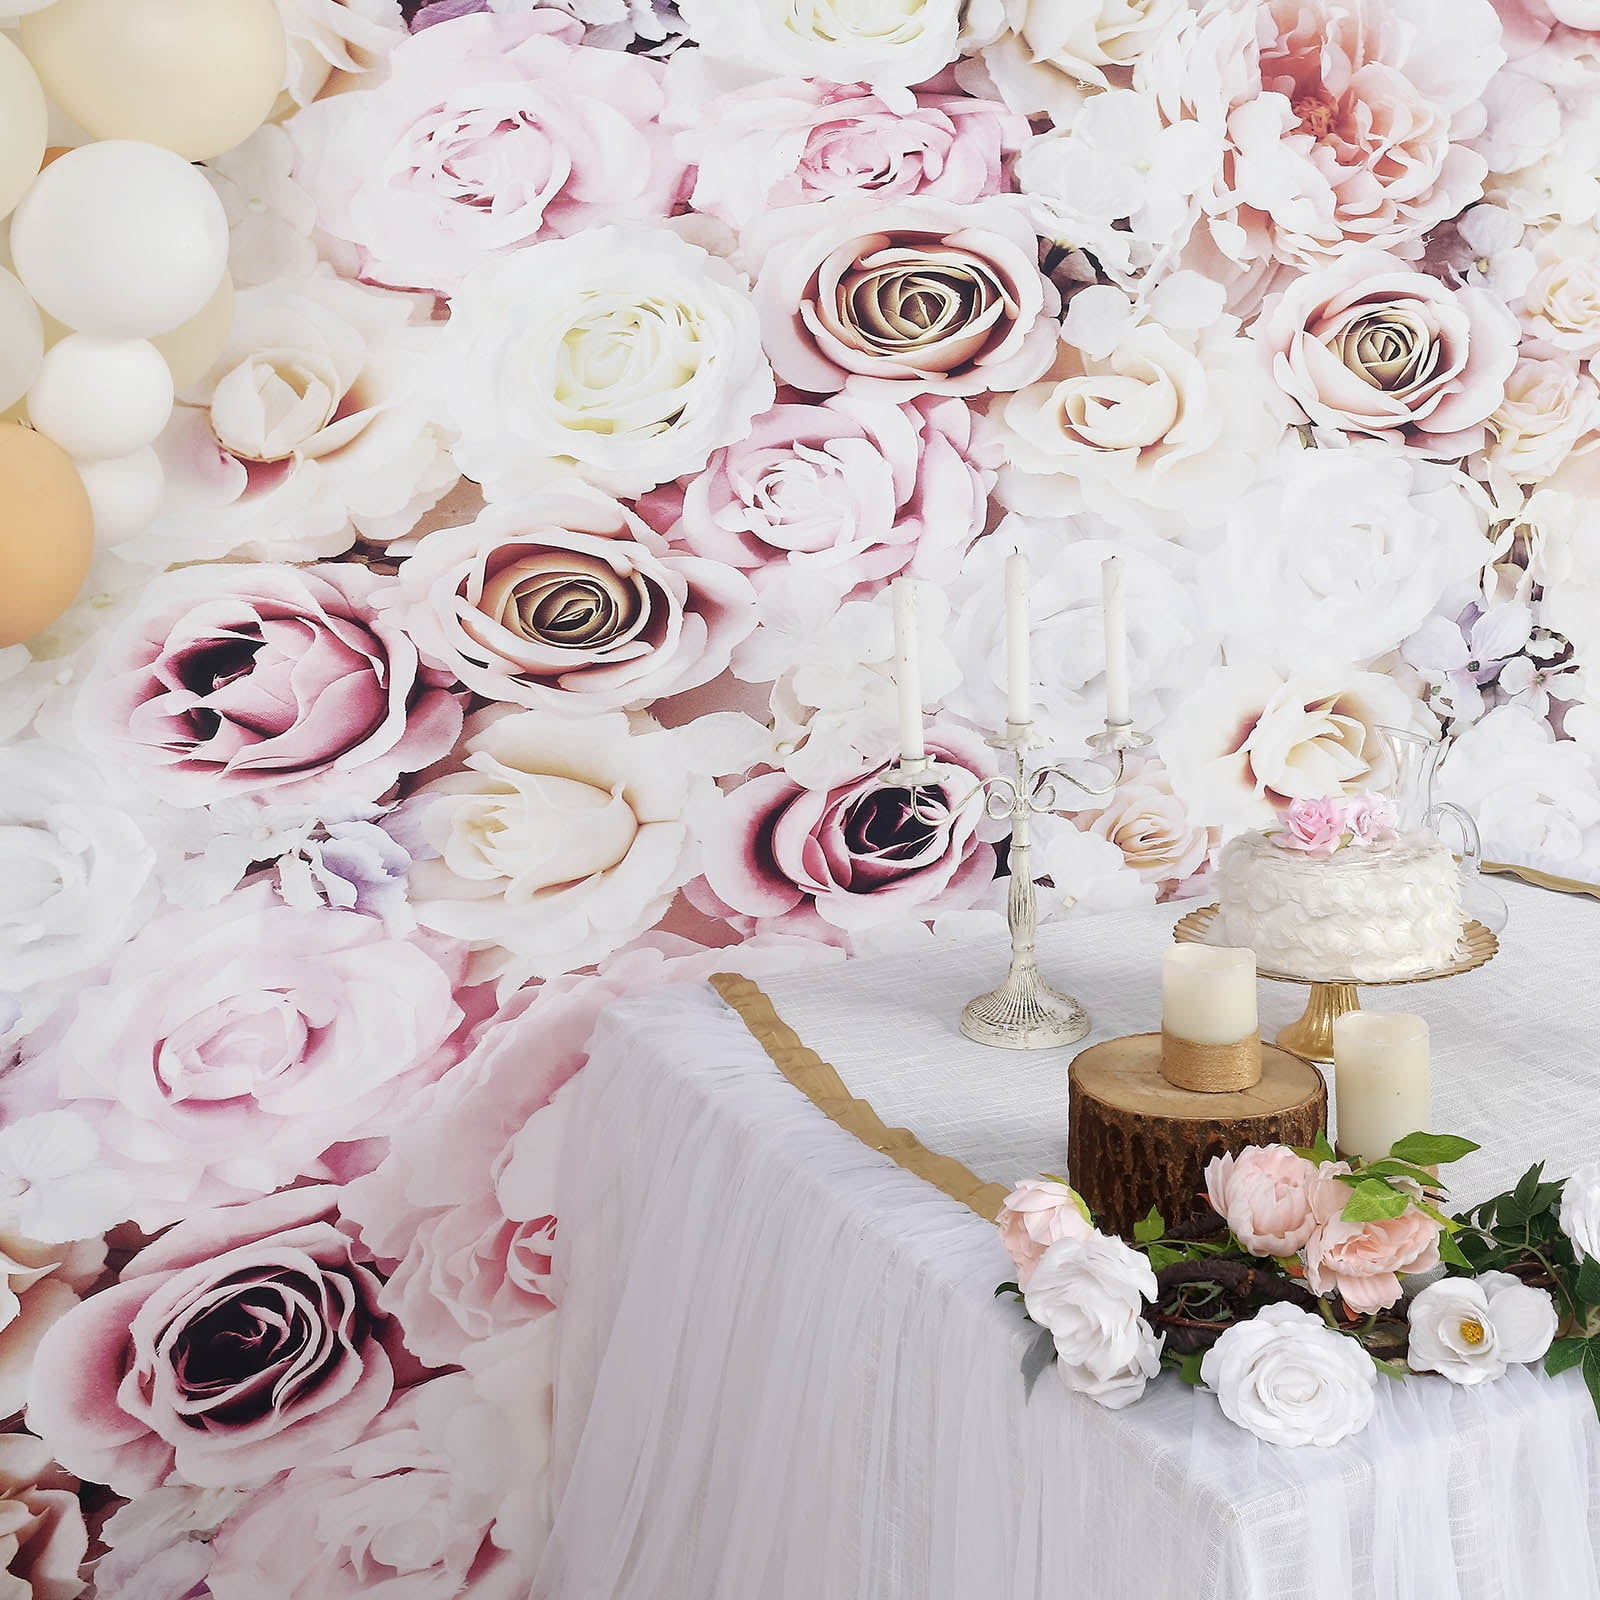 Pink Banner with White and Black Floral Paper Decor Stock Image